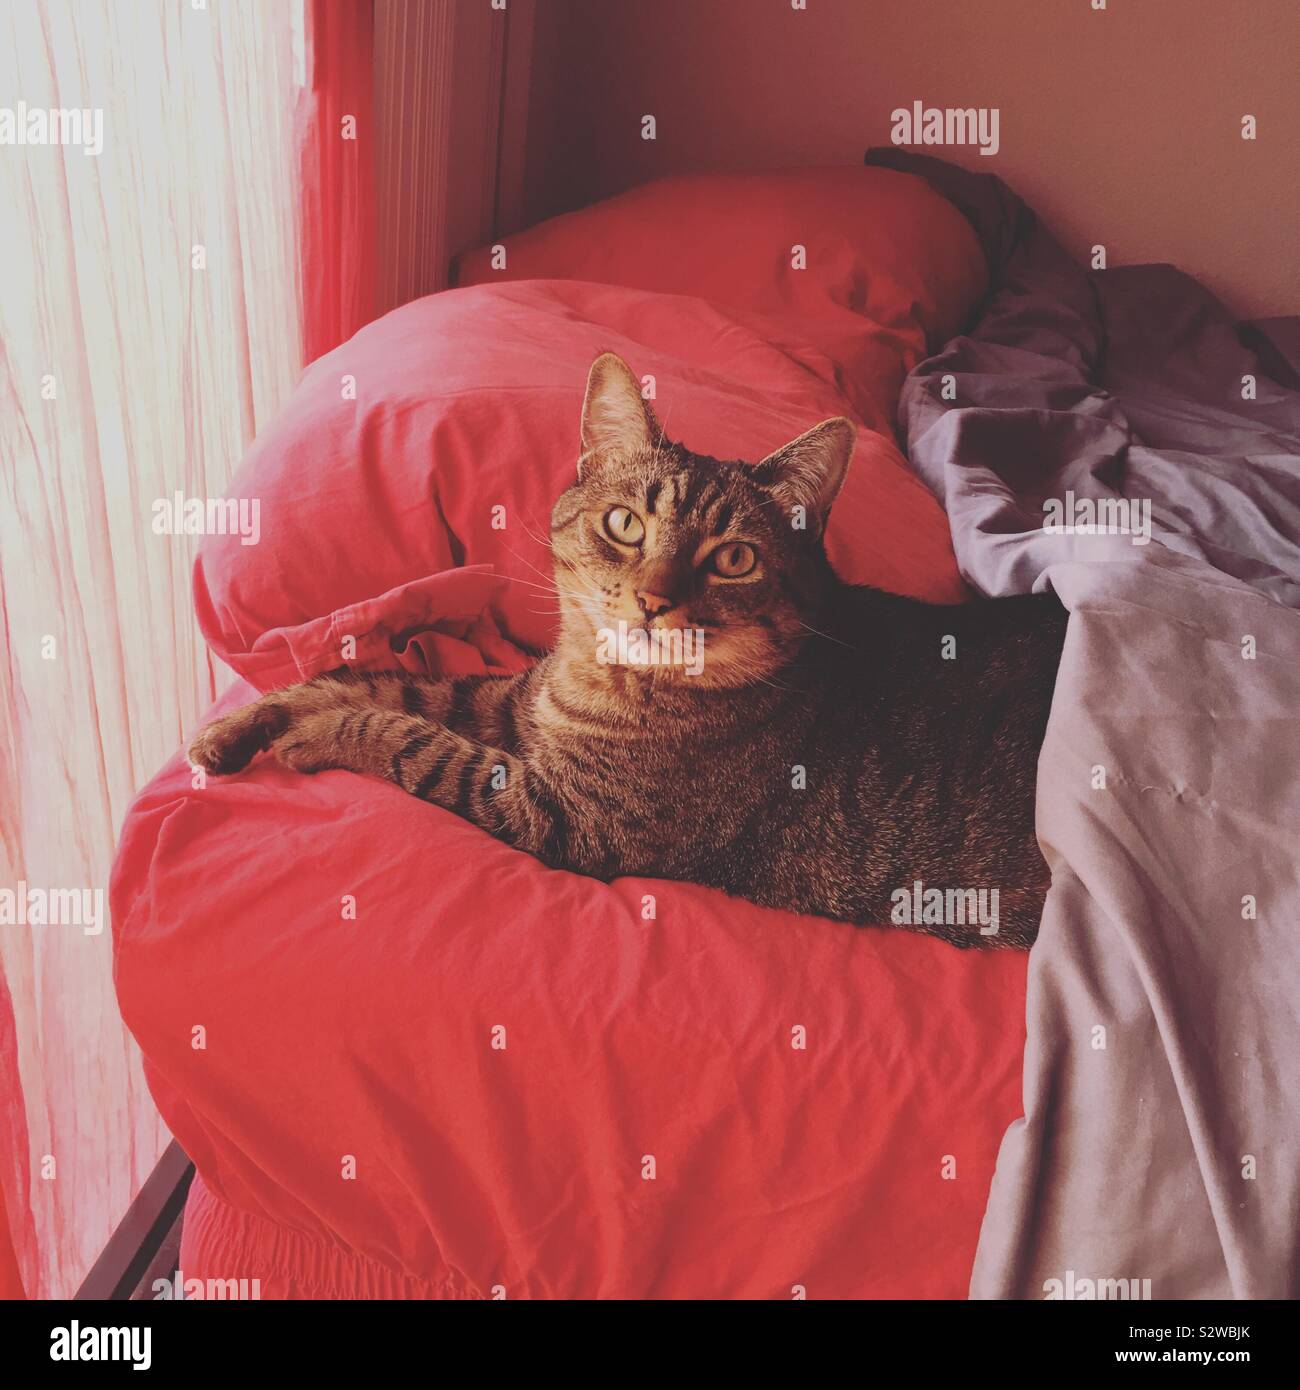 A tabby cat resting on a bed. Stock Photo